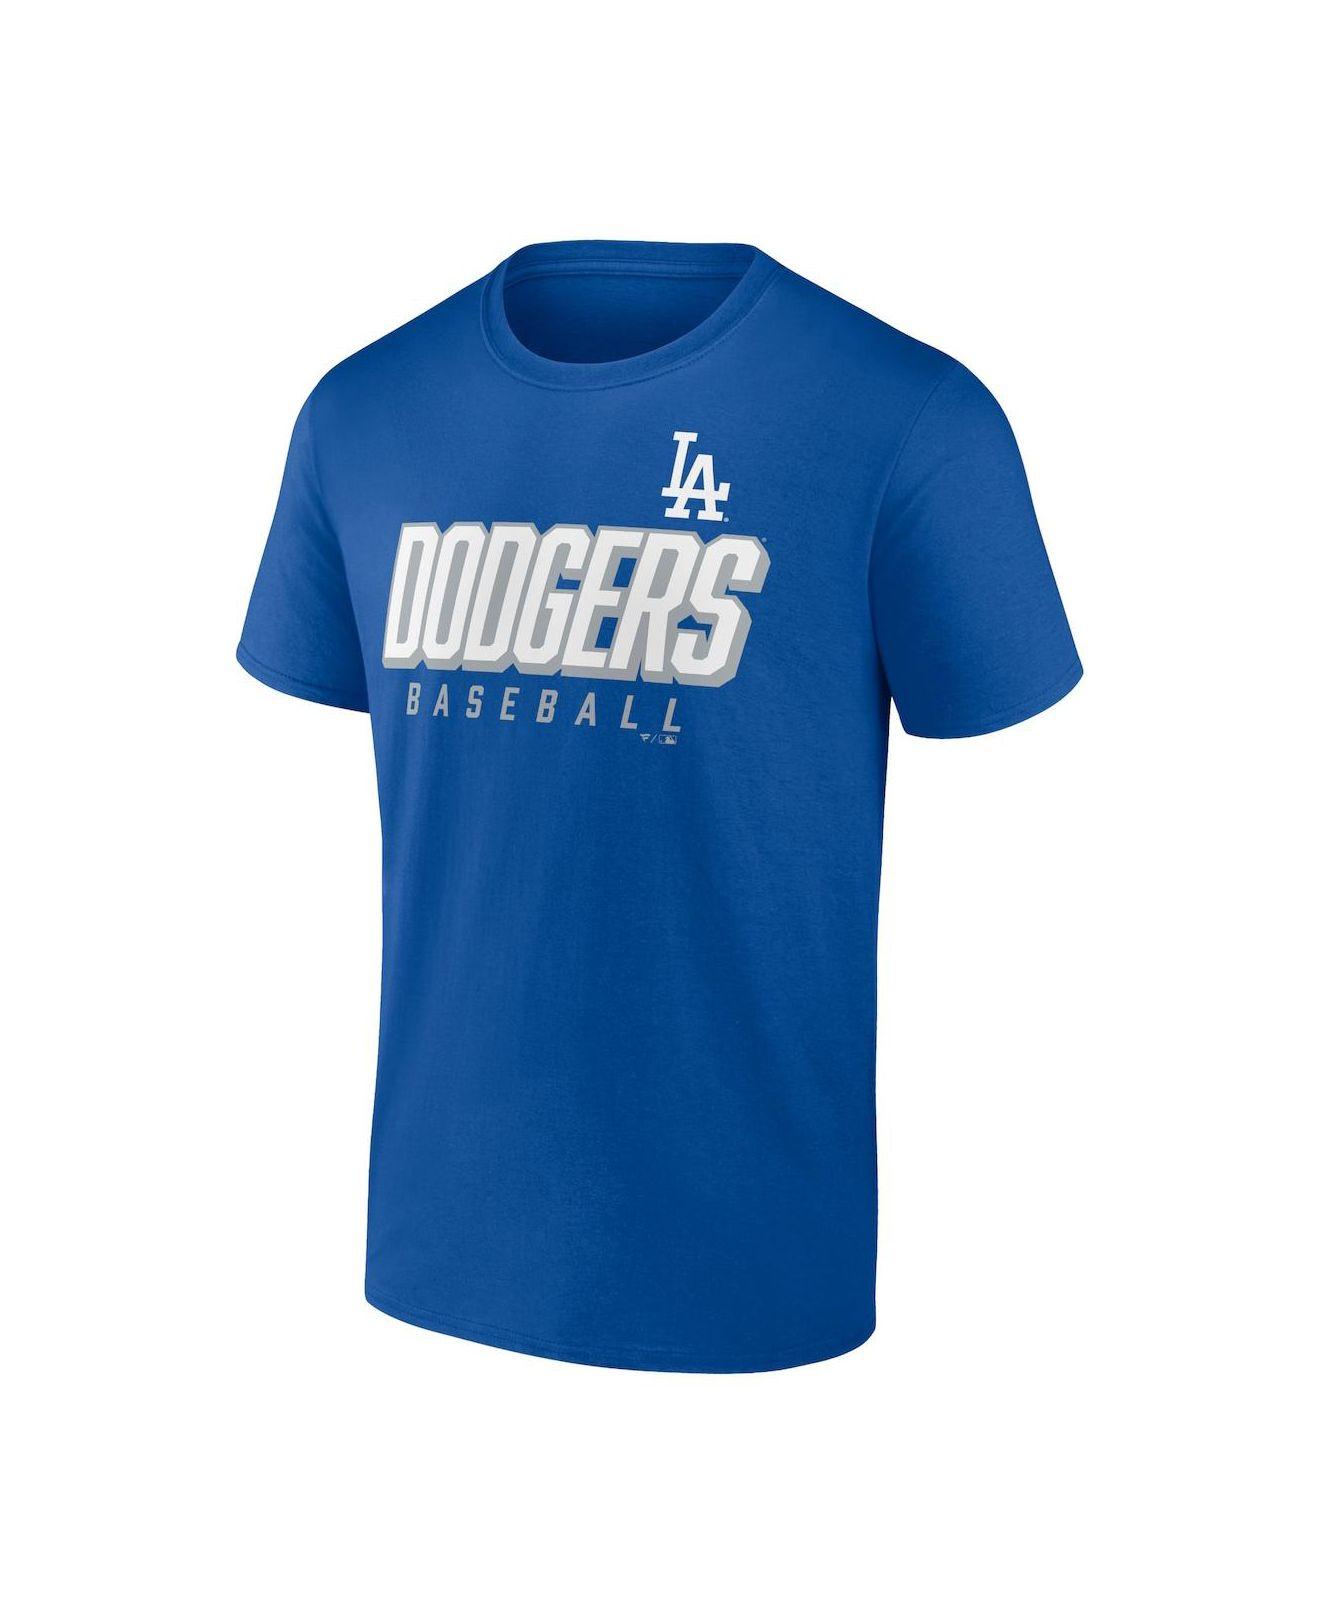 Fanatics Branded Royal, White Los Angeles Dodgers Player Pack T